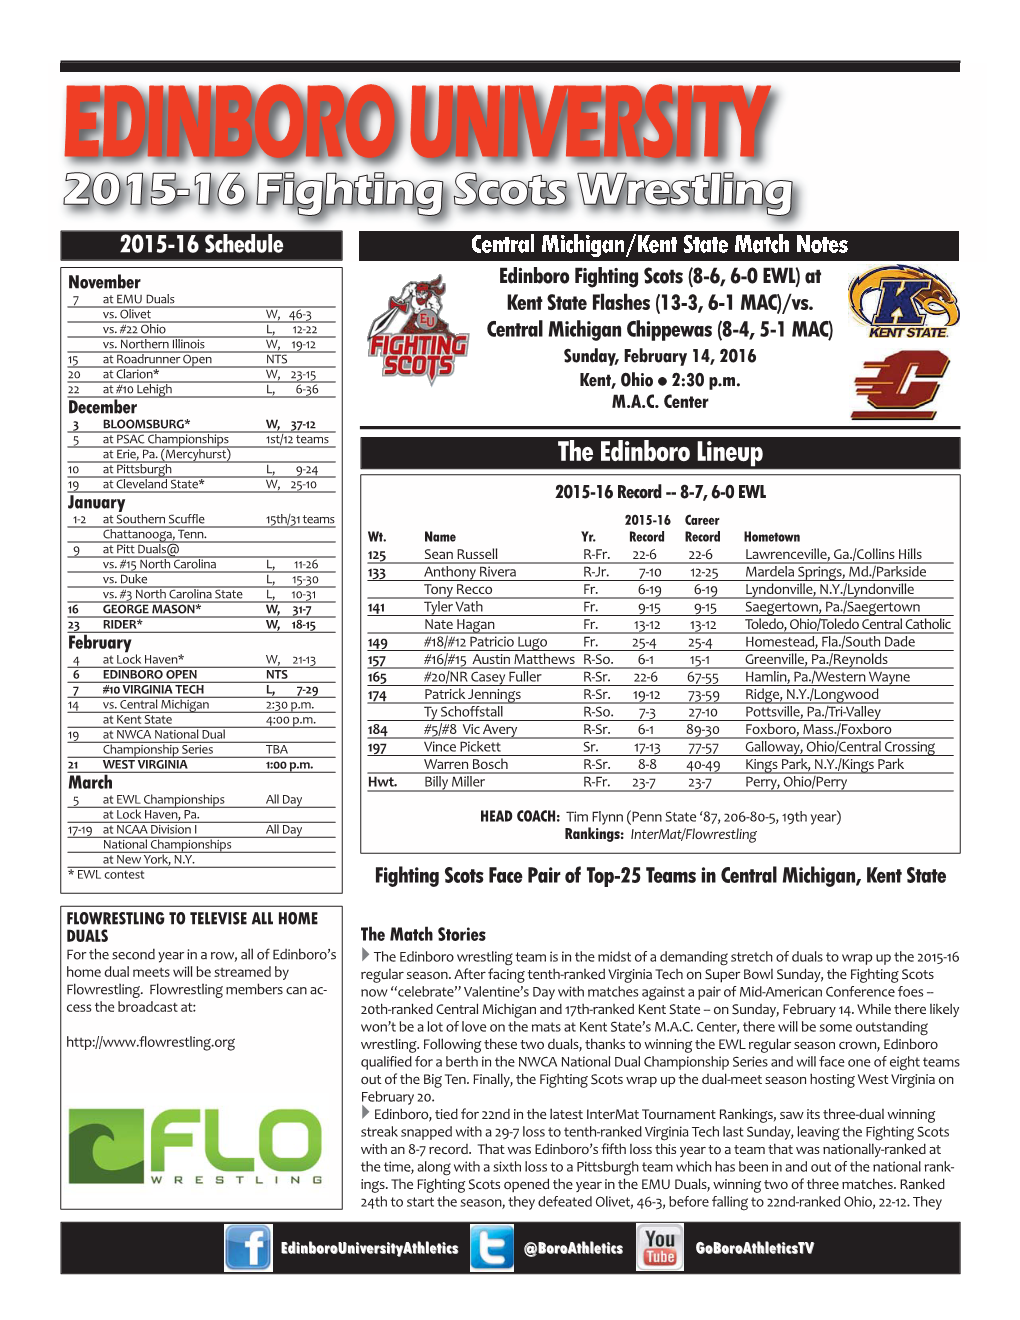 2015-16 CMU and Kent State Wrestling Notes Layout 1